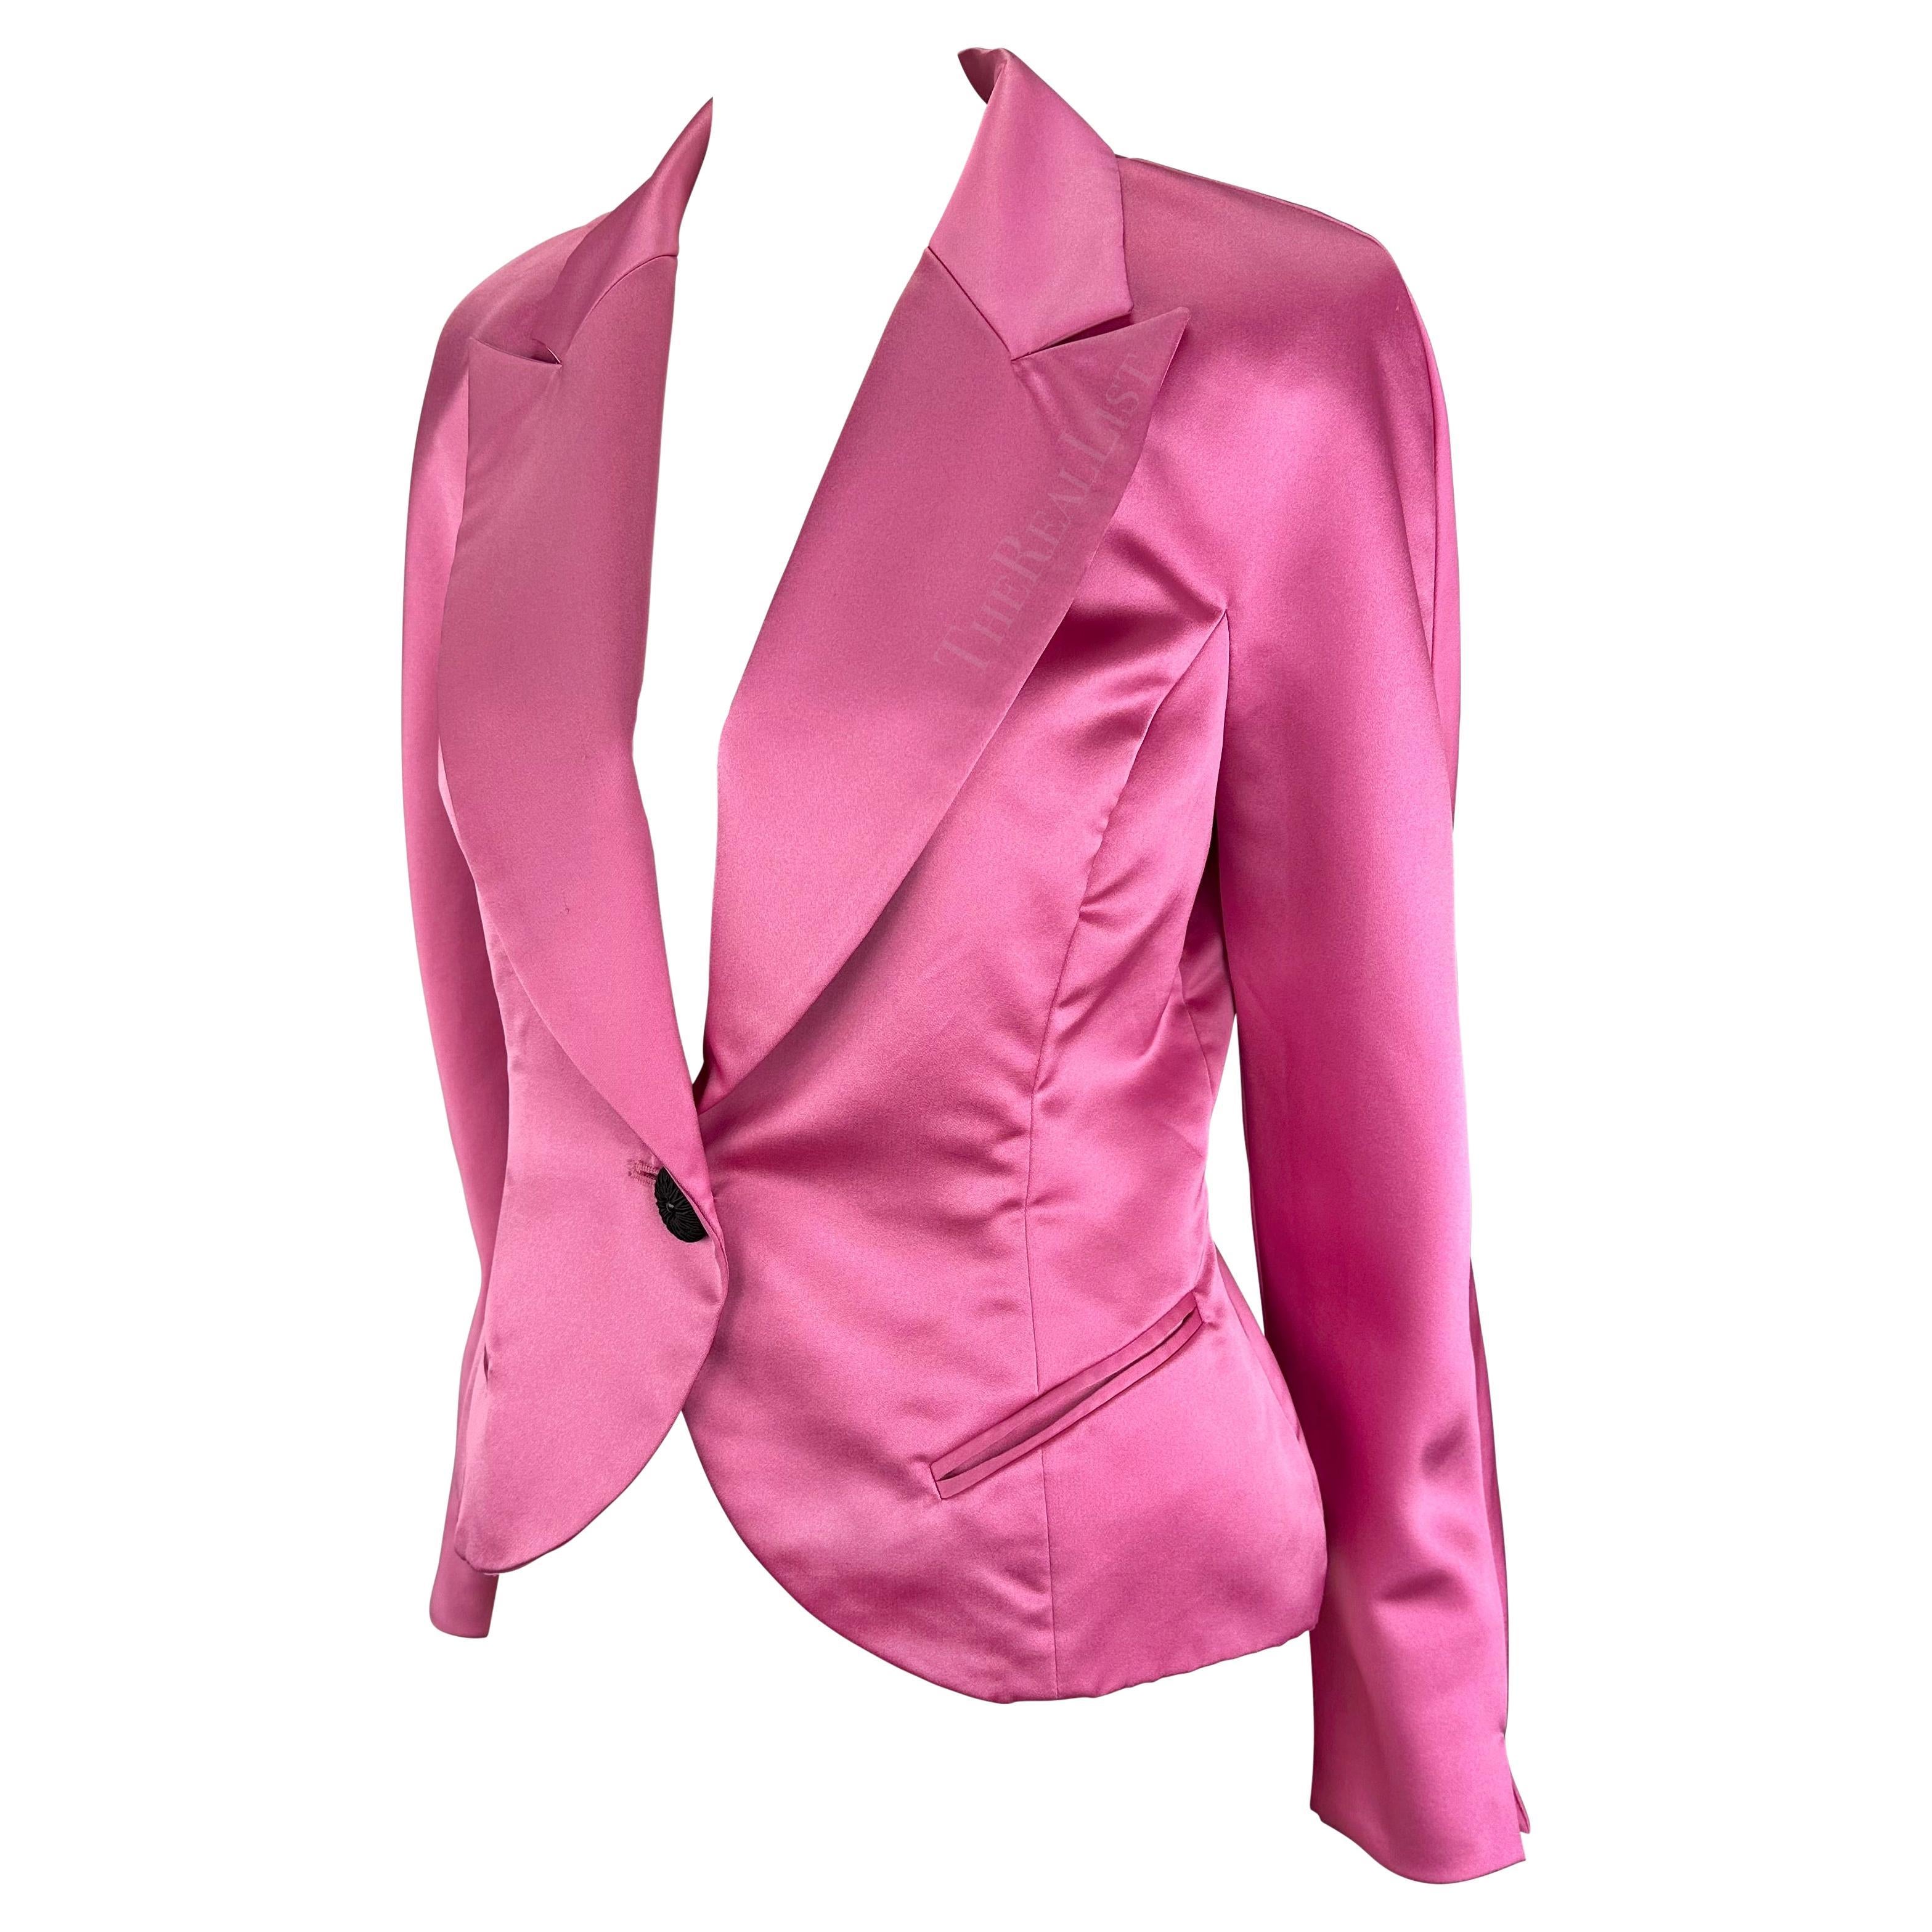 Presenting a fabulous hot pink satin Christian Dior blazer. From the 1980s, this blazer exudes a magnetic charm with its hot bubblegum pink satin fabric, emanating a stunning shimmer. The wide peak lapel and single black woven button closure enhance